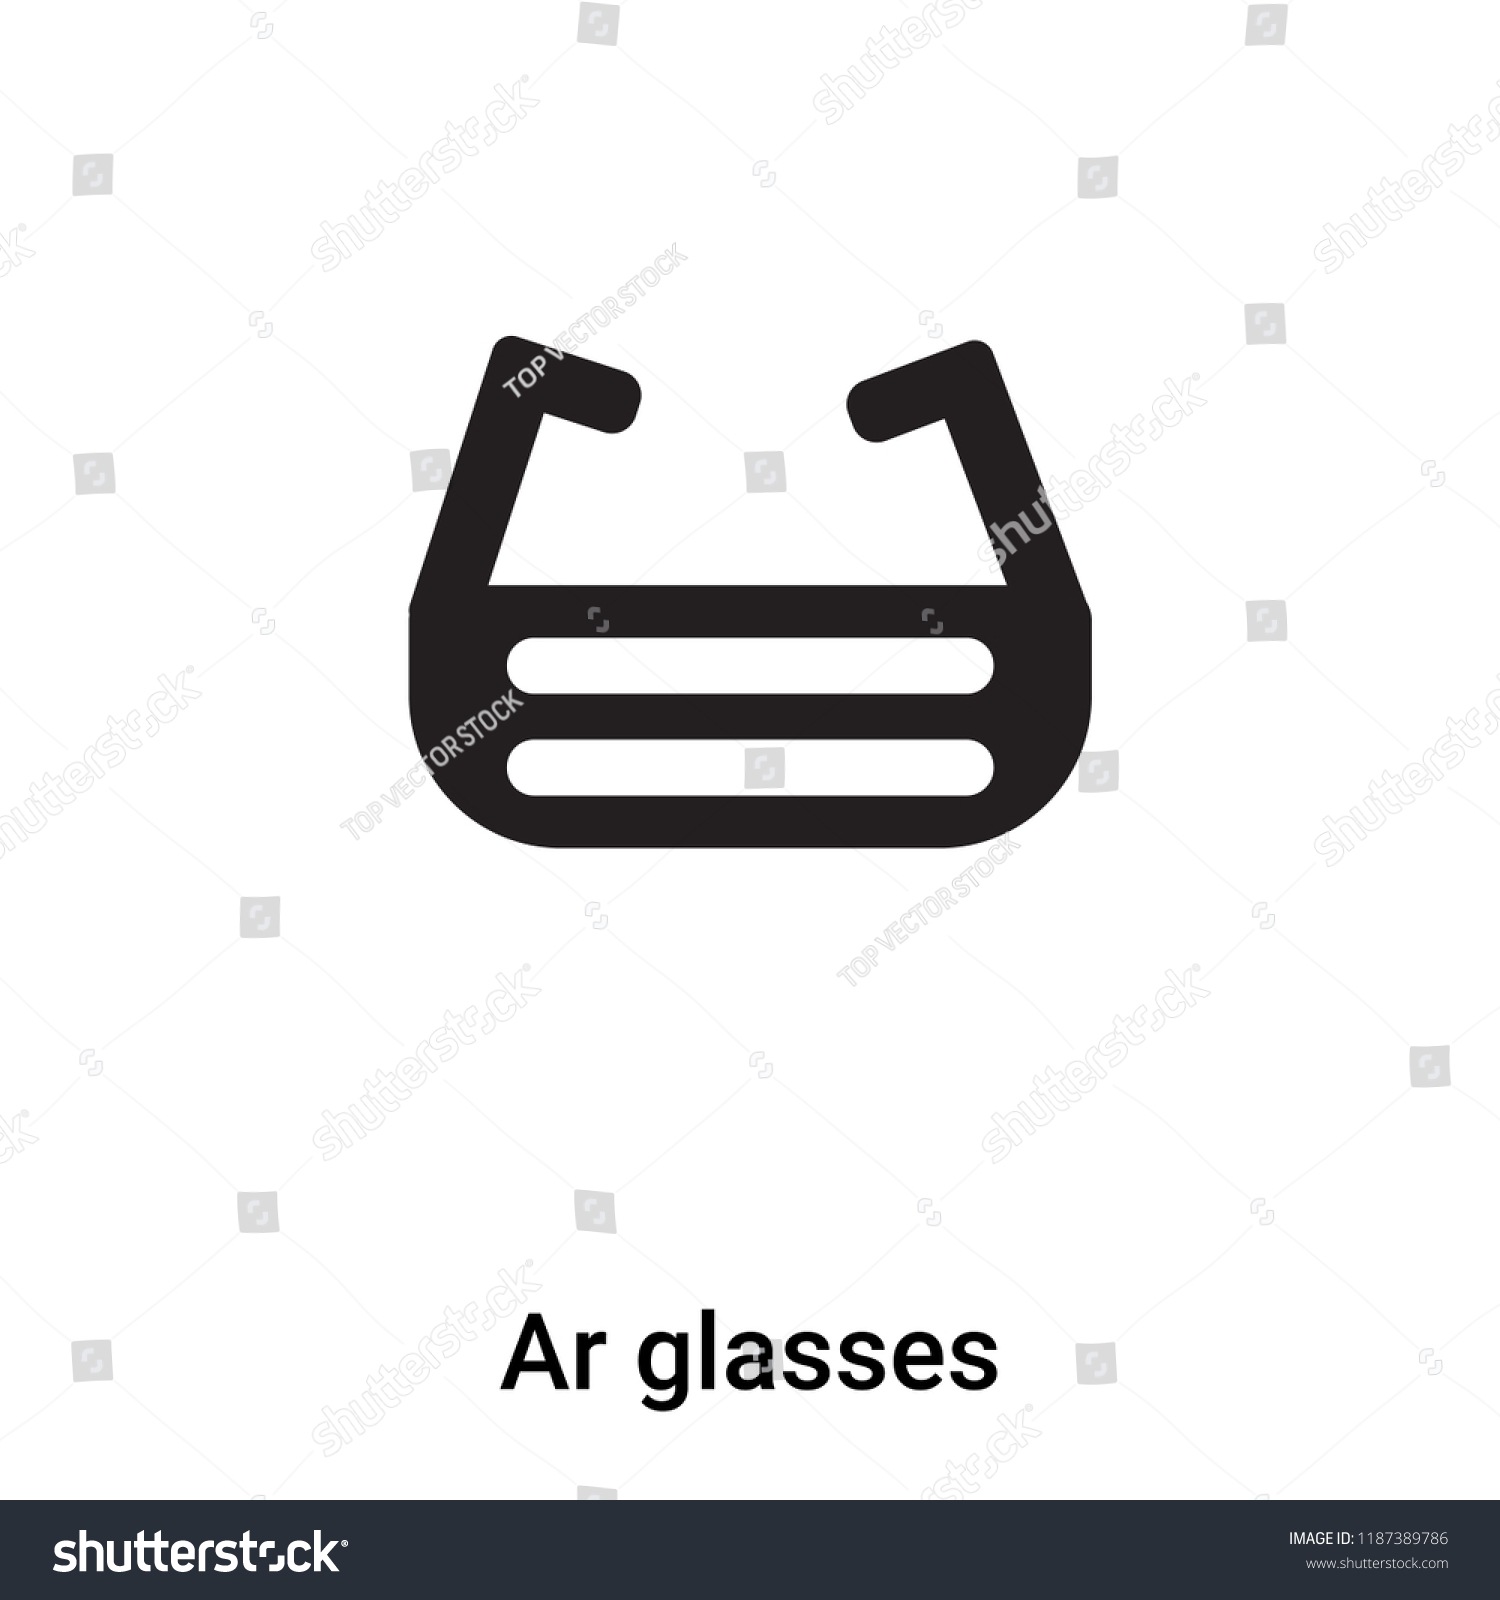 SVG of Ar glasses icon vector isolated on white background, logo concept of Ar glasses sign on transparent background, filled black symbol svg